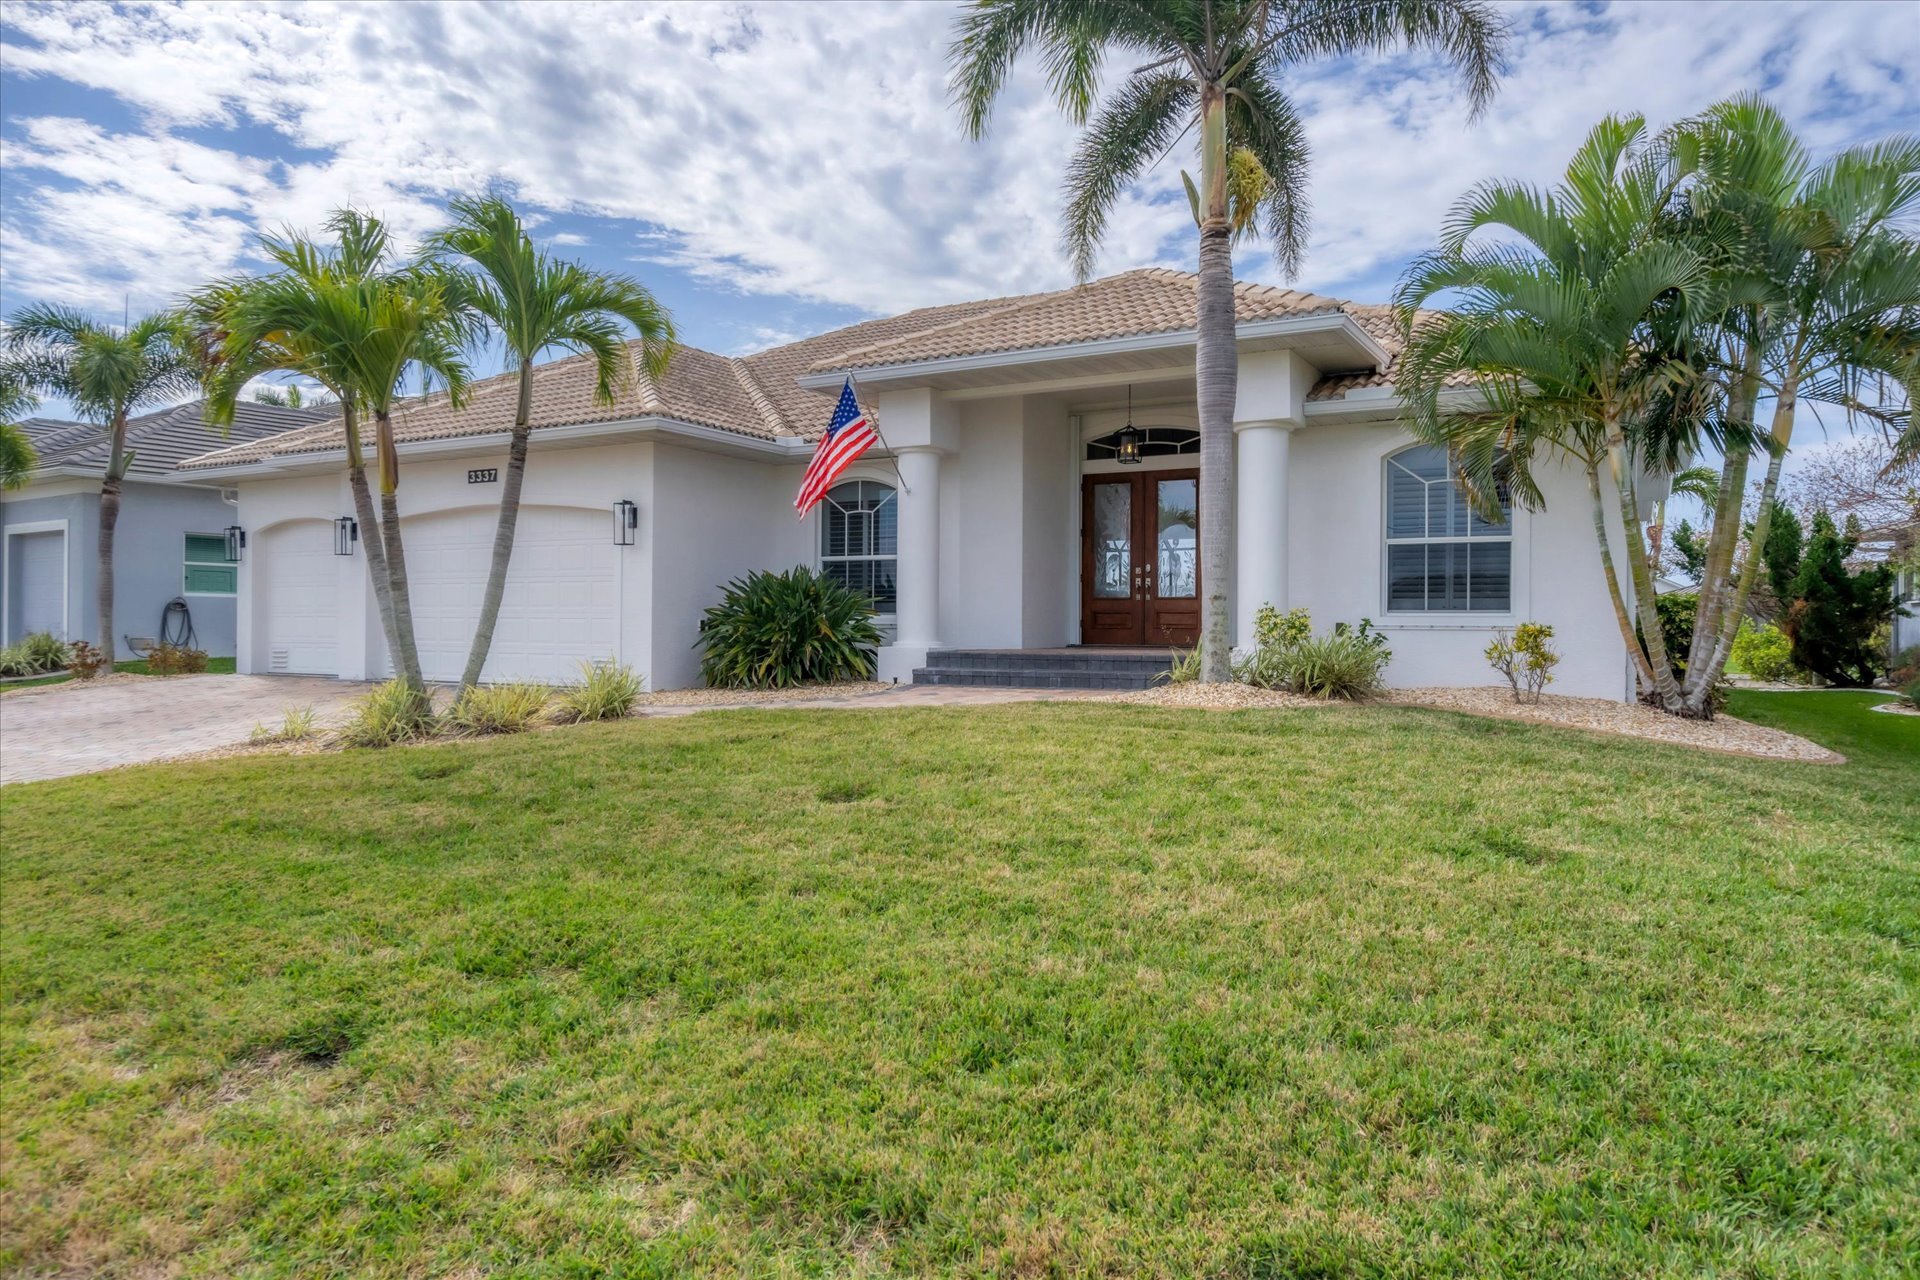 Gorgeous Punta Gorda Isle pool home with private pool/spa on canal